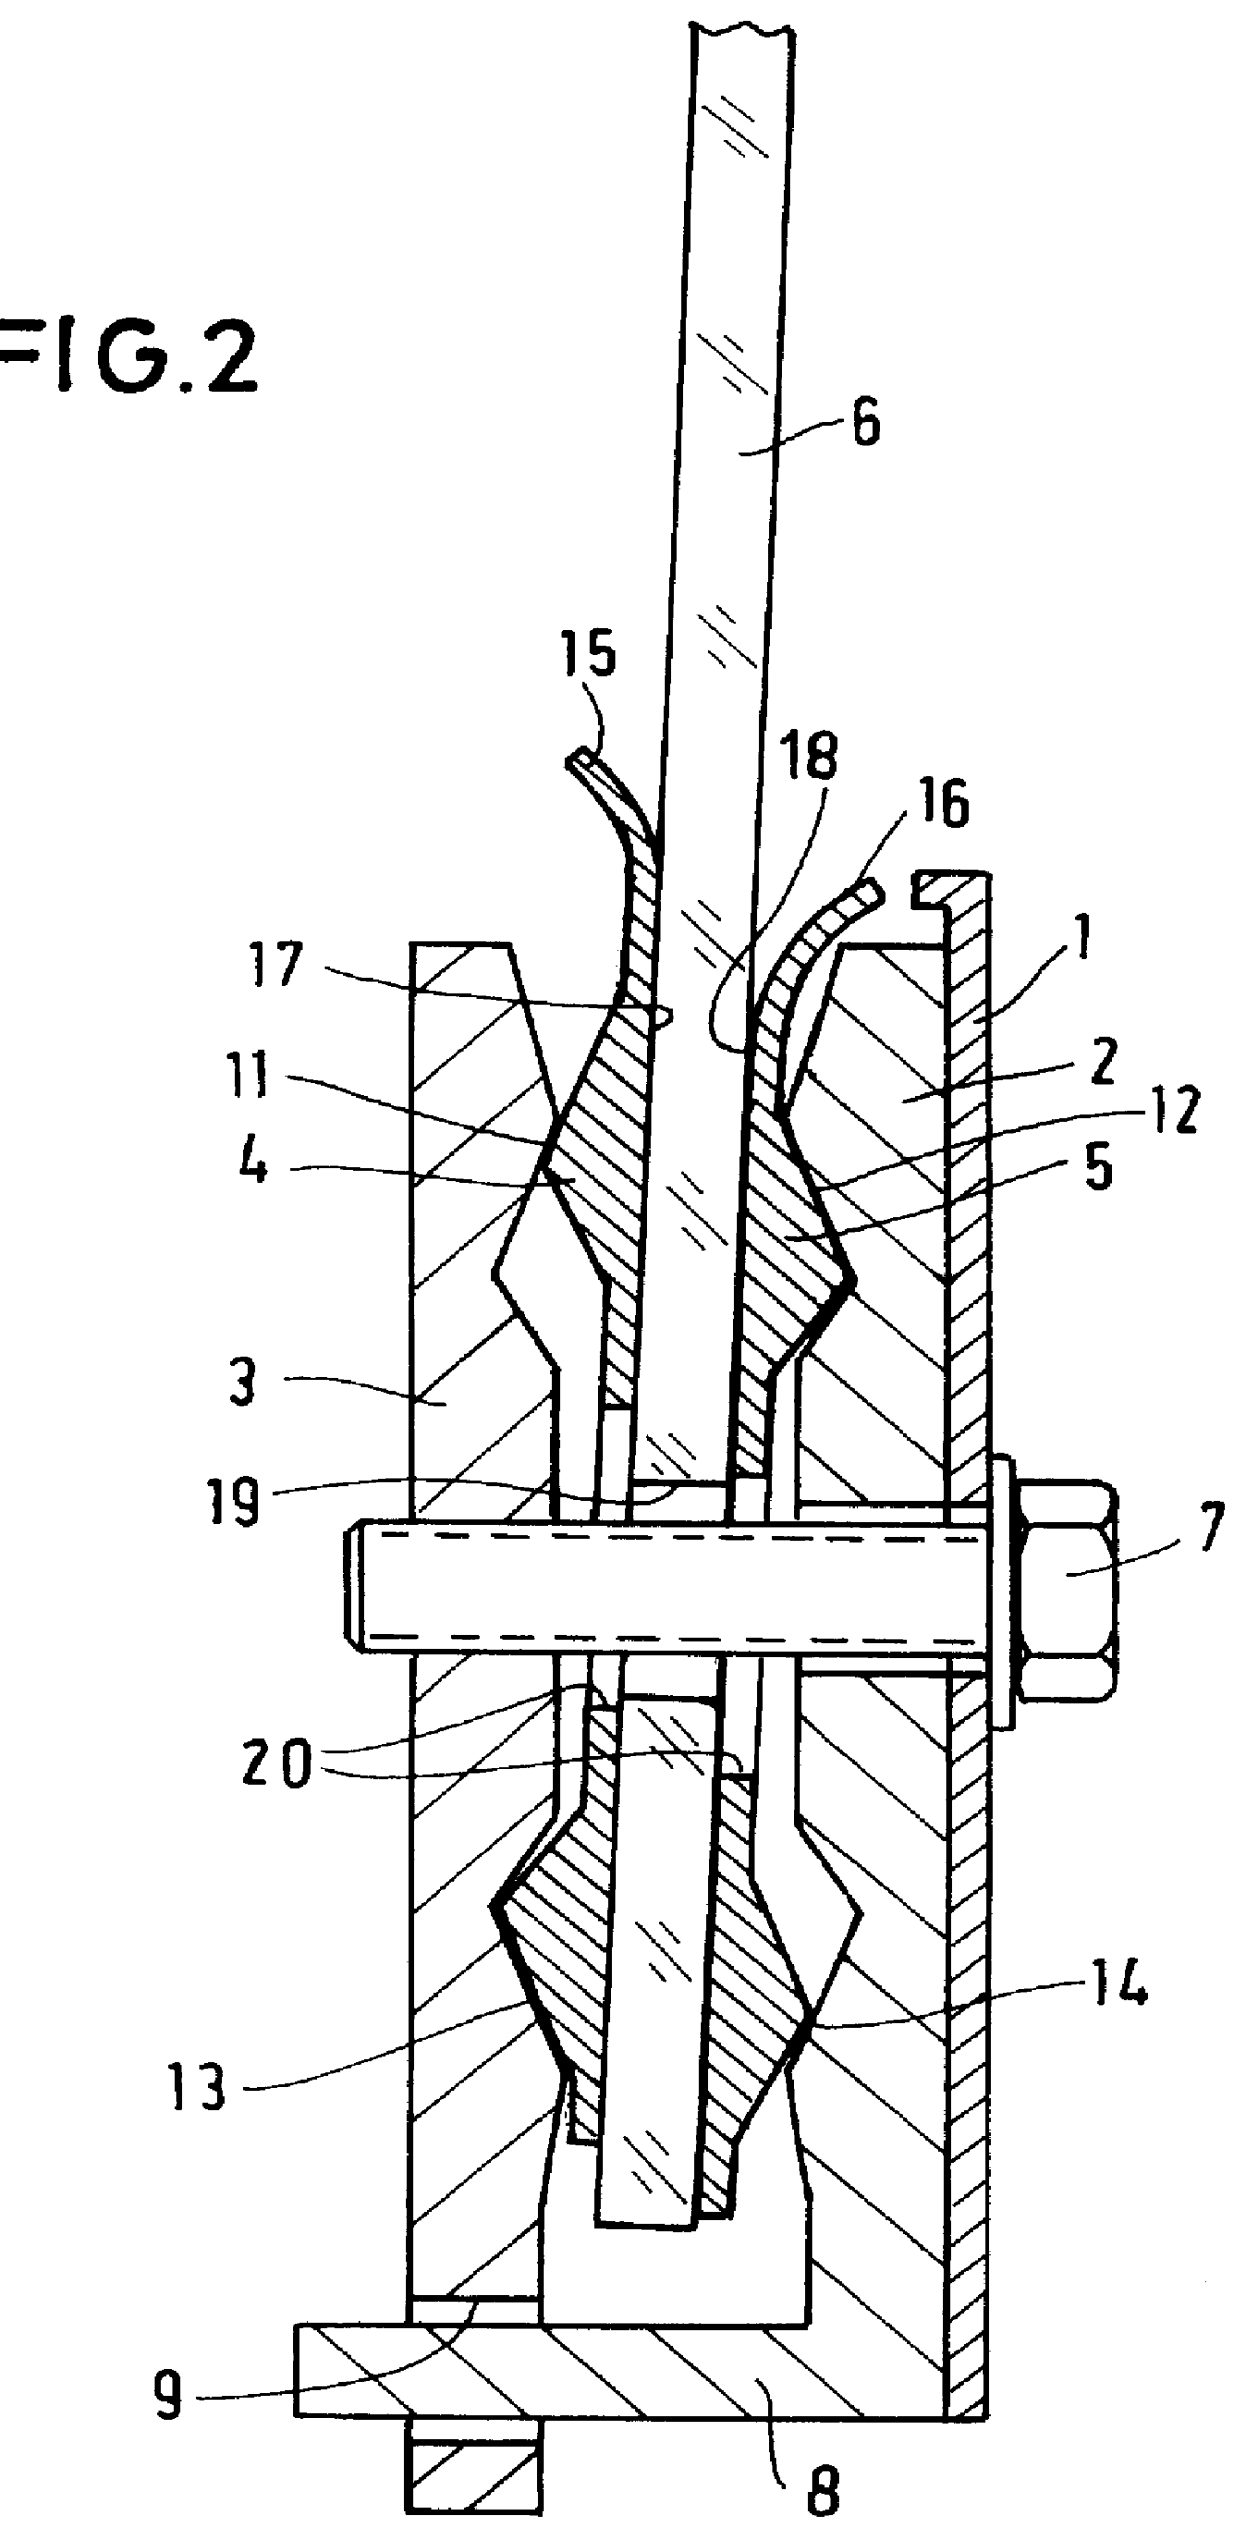 Clamping apparatus for holding a motor vehicle window pane